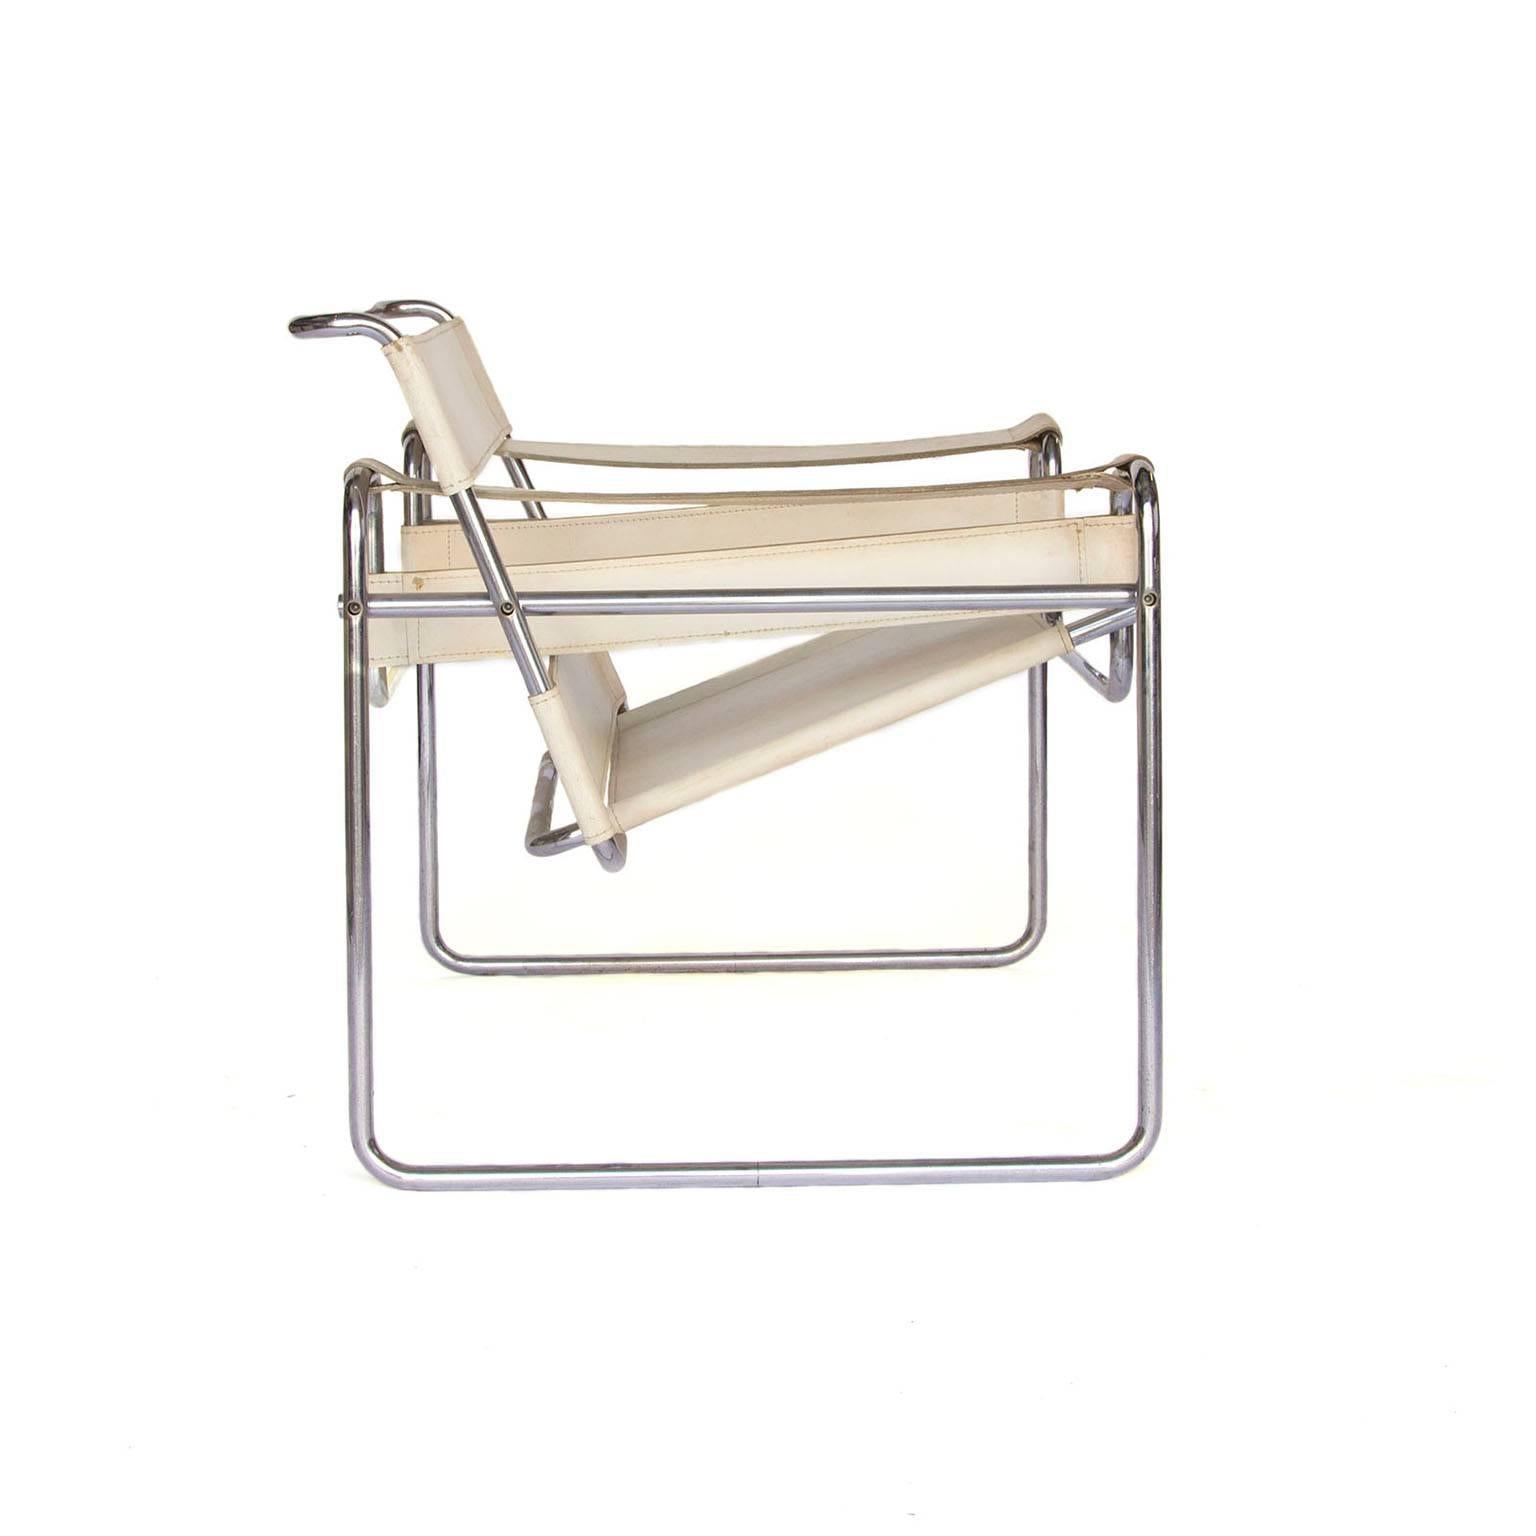 Marcel Breuer's 1925 design is a widely recognized masterpiece of modern furniture, having long ago achieved iconic status. This Wassily chair, named after Wassily Kandinsky, date to circa 1968, when Knoll Associates became Knoll International,